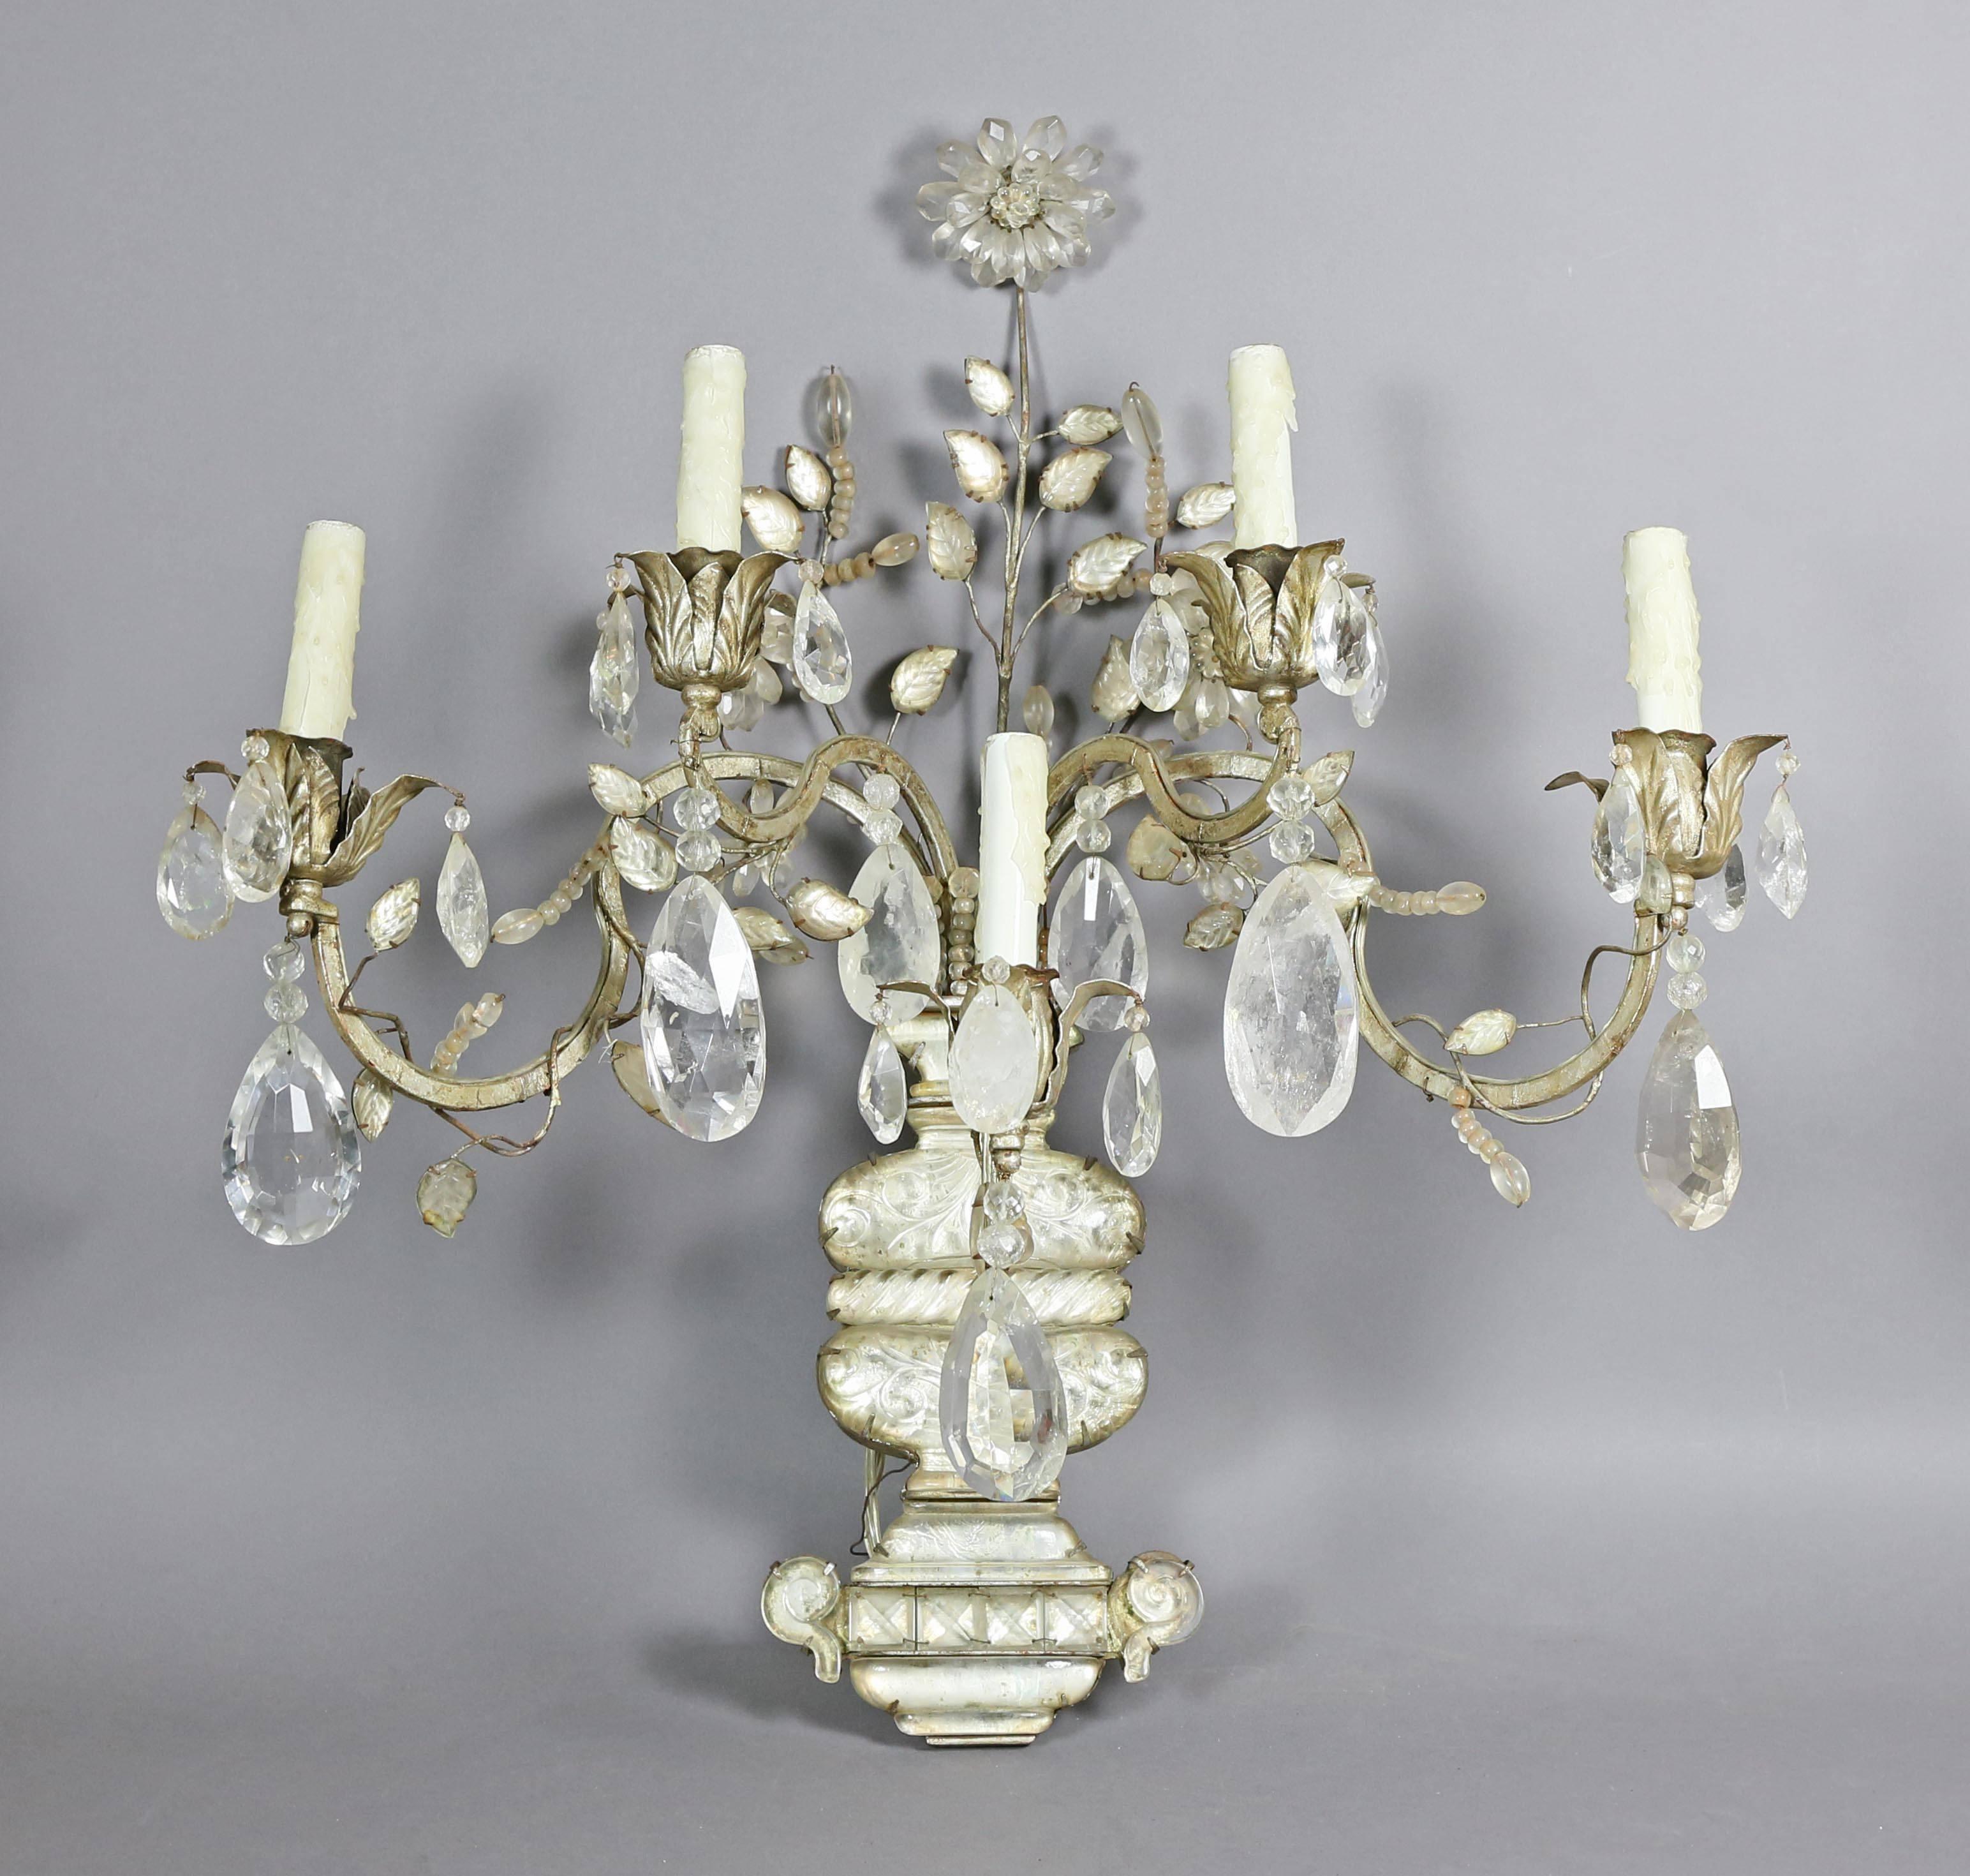 Each in the form of a flowered filled urn with five scrolled candle branches entwined with vines and large pendants. Provenance; Sothebys New York Important French Furniture, May 25th 2000, Lot 231, sold for 23,750 dollars.